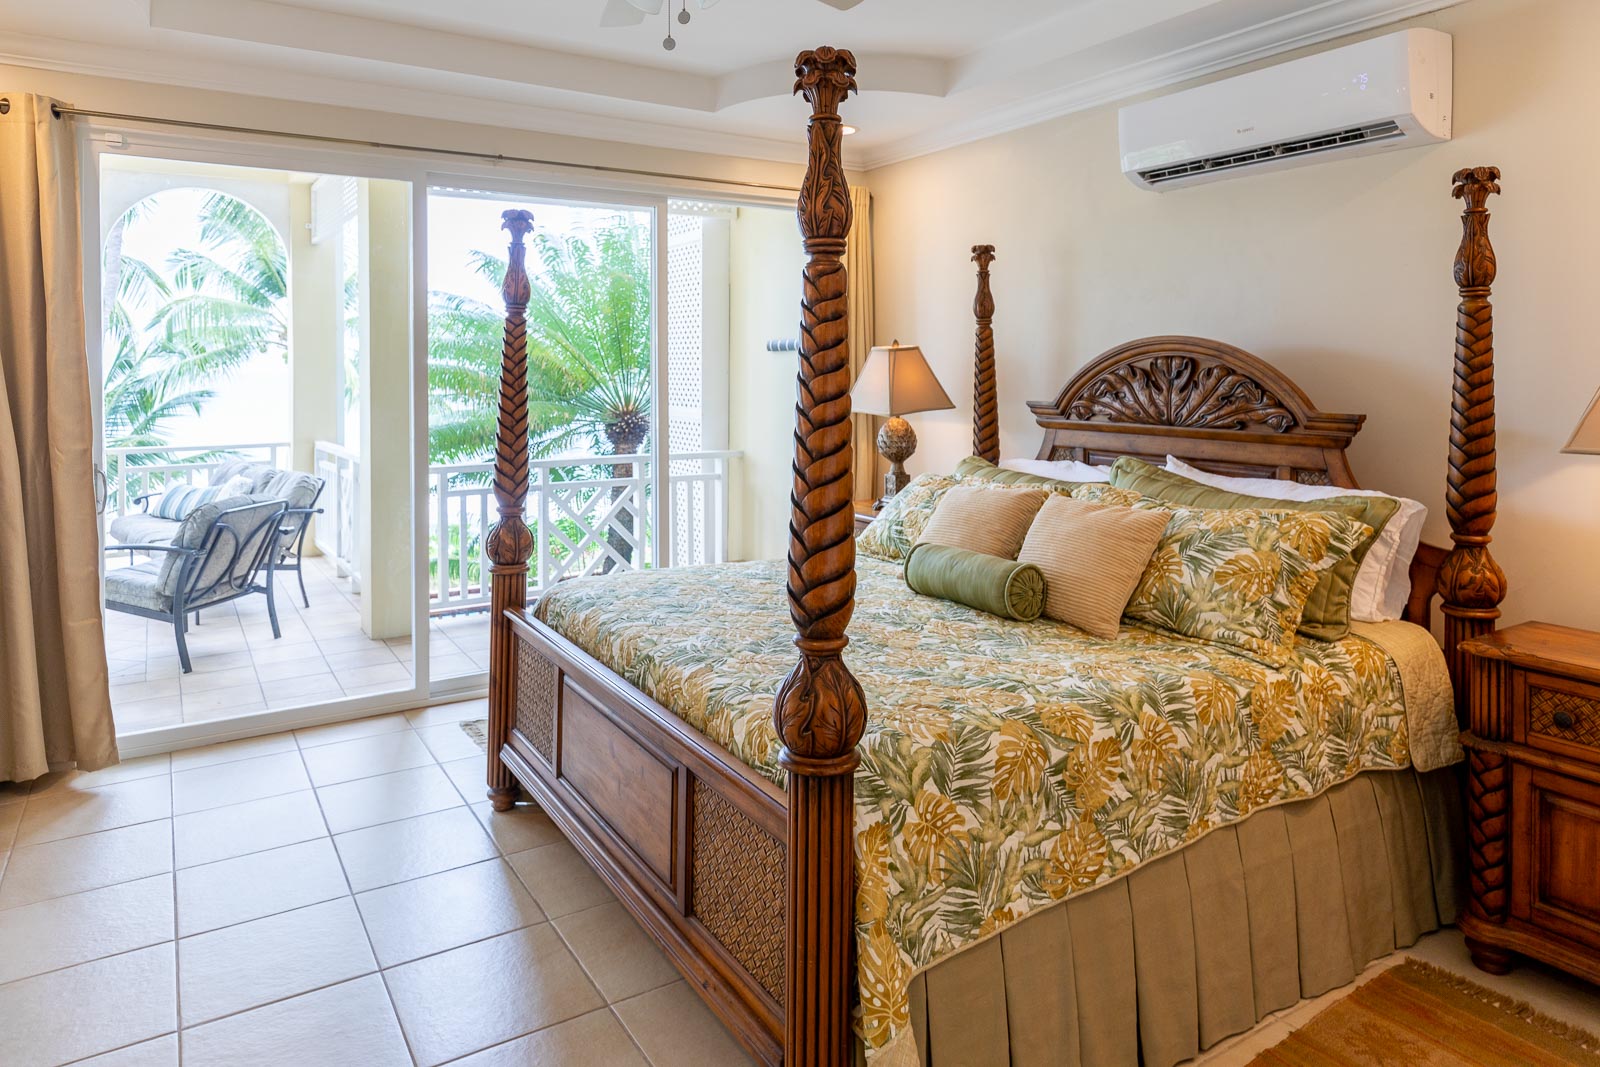 Anthurium Suite at Black Rock Dreams self-catering vacation rental